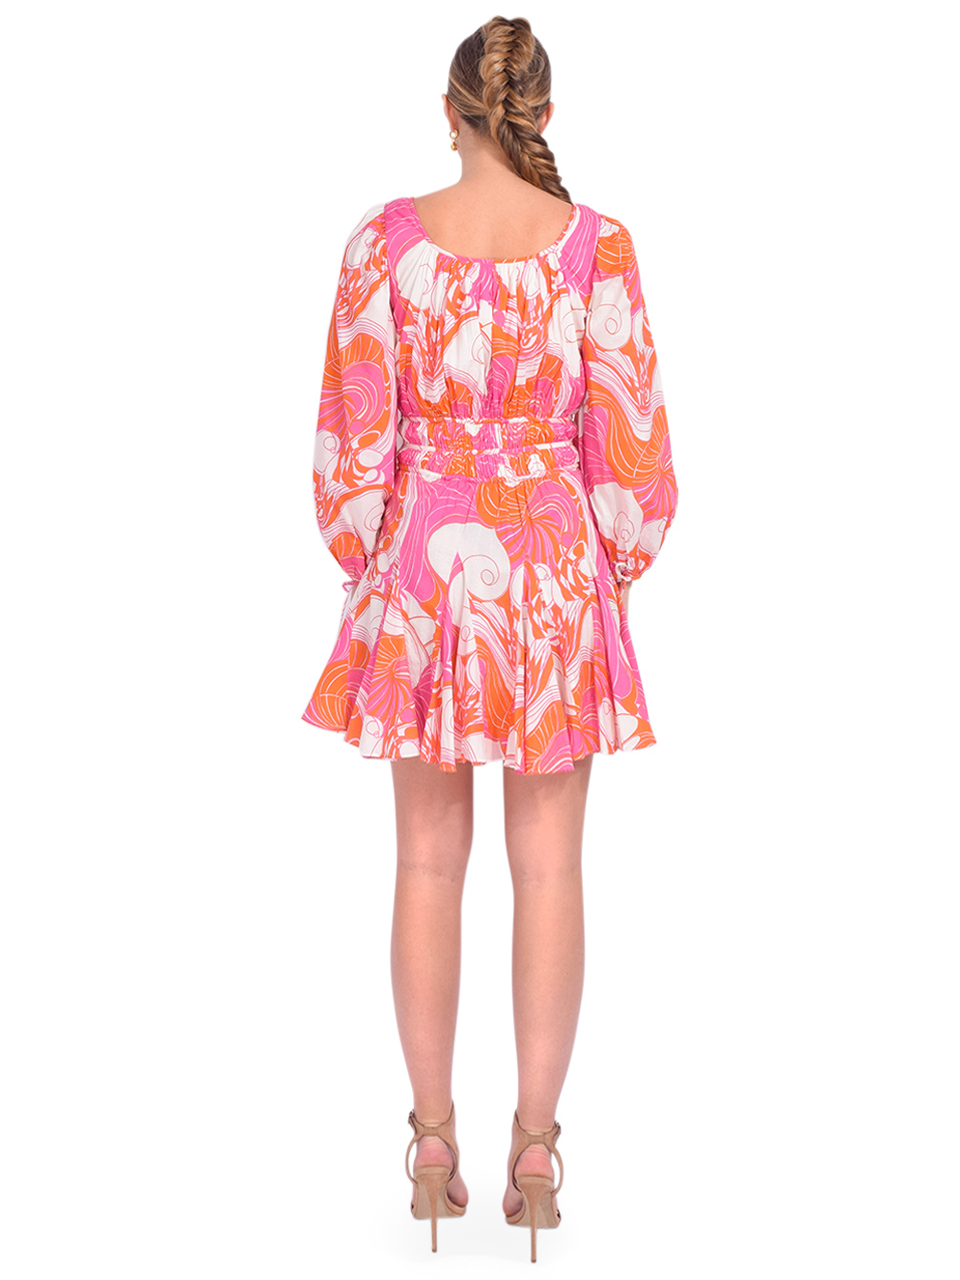 RHODE Leona Dress in Pink Deco Surf Back View 